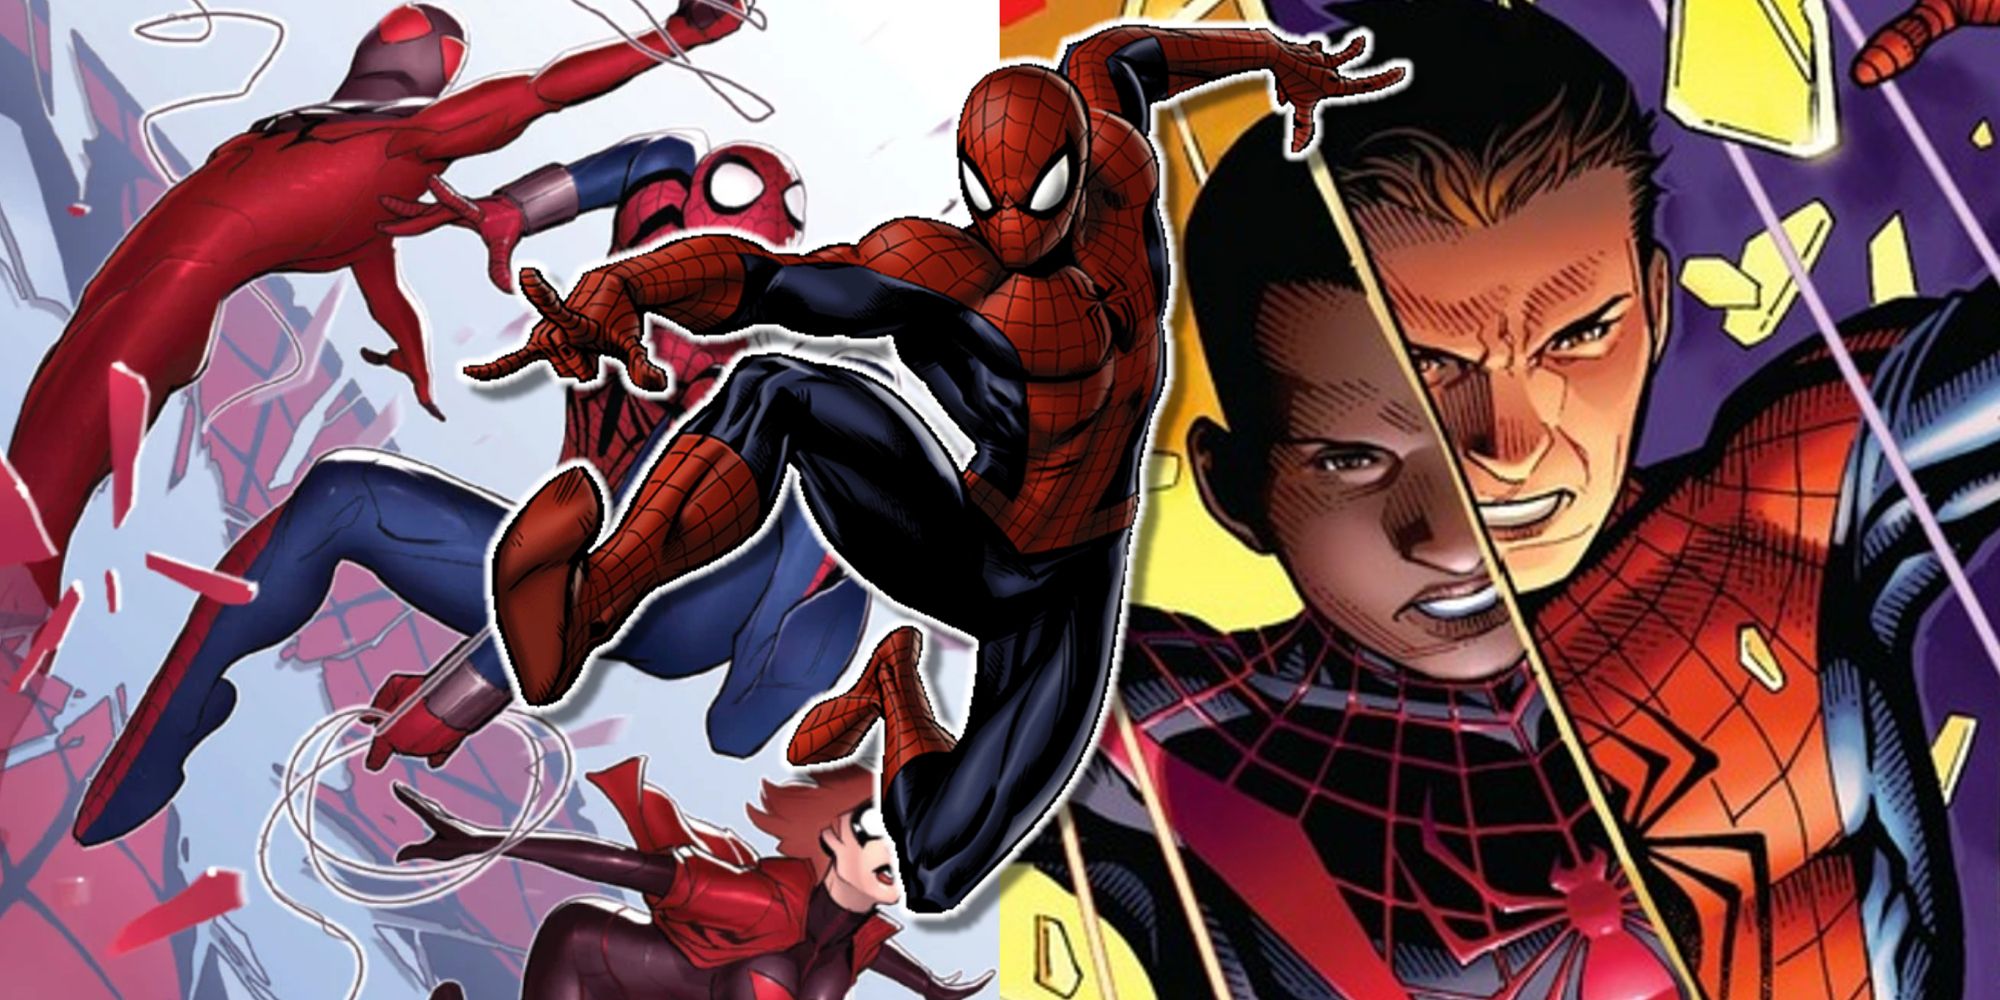 Split image of different Spider-Man miniseries in Marvel Comics with Peter Parker, Miles Morales, and Scarlet Spiders